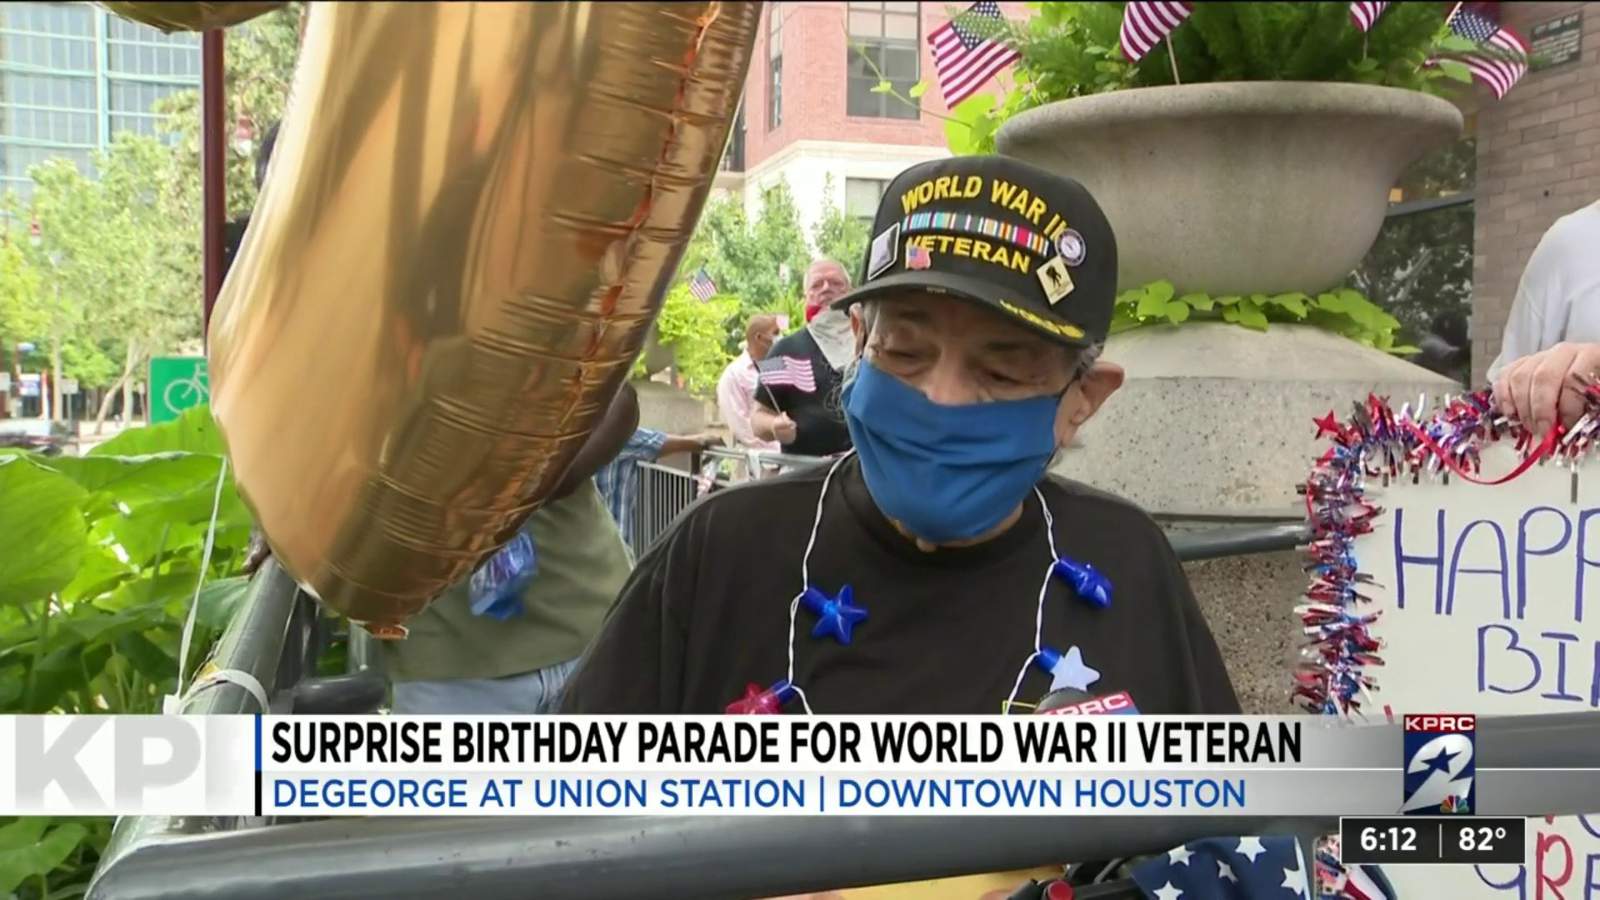 One Good Thing: Surprise birthday parade for World War II veteran in downtown Houston